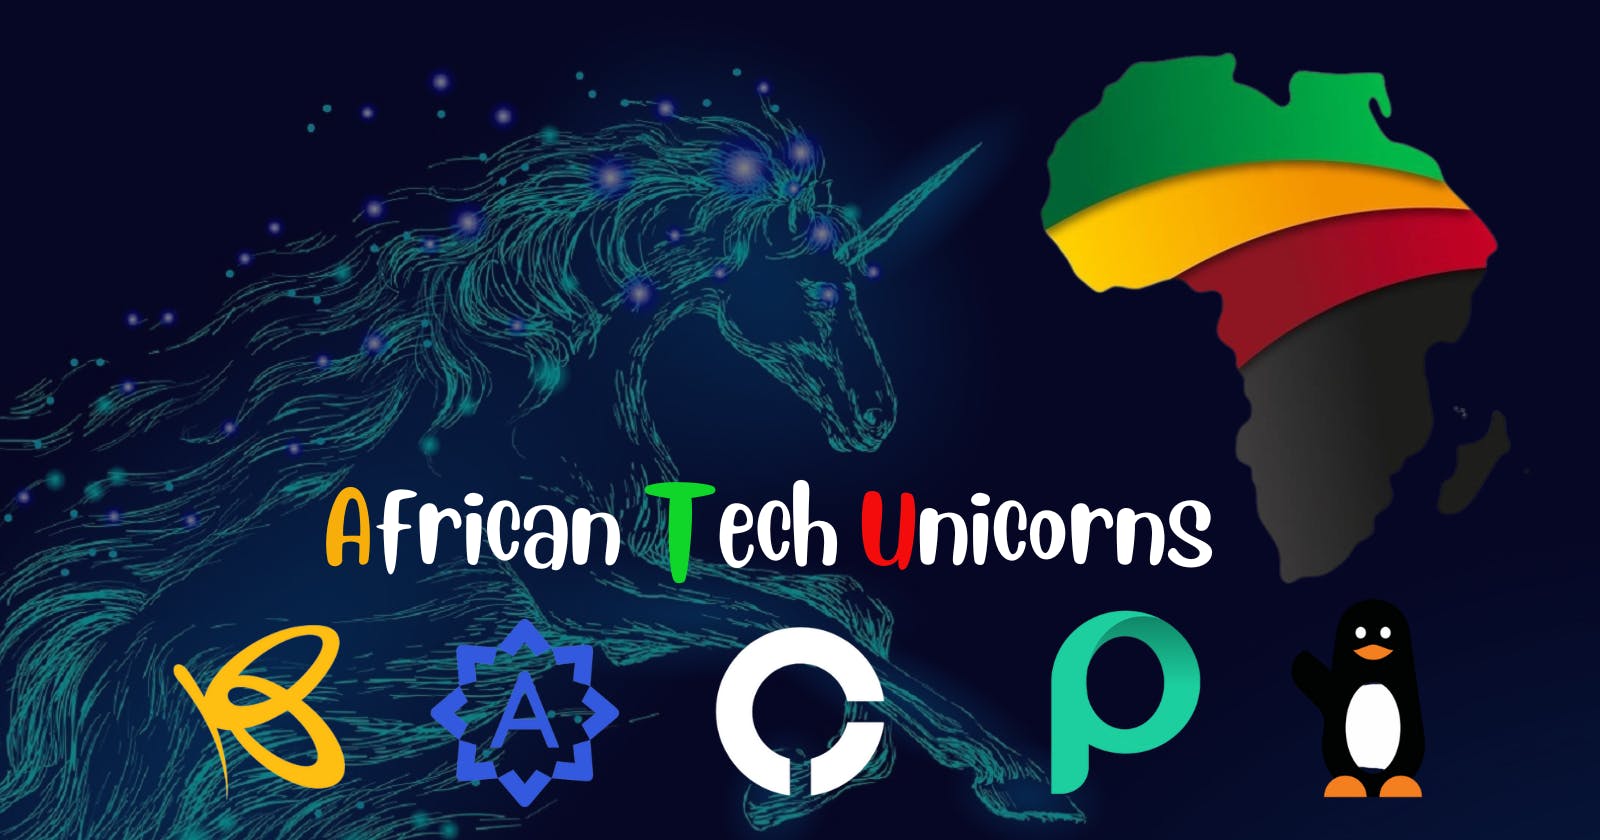 FACOW: The Tech Unicorns of Africa